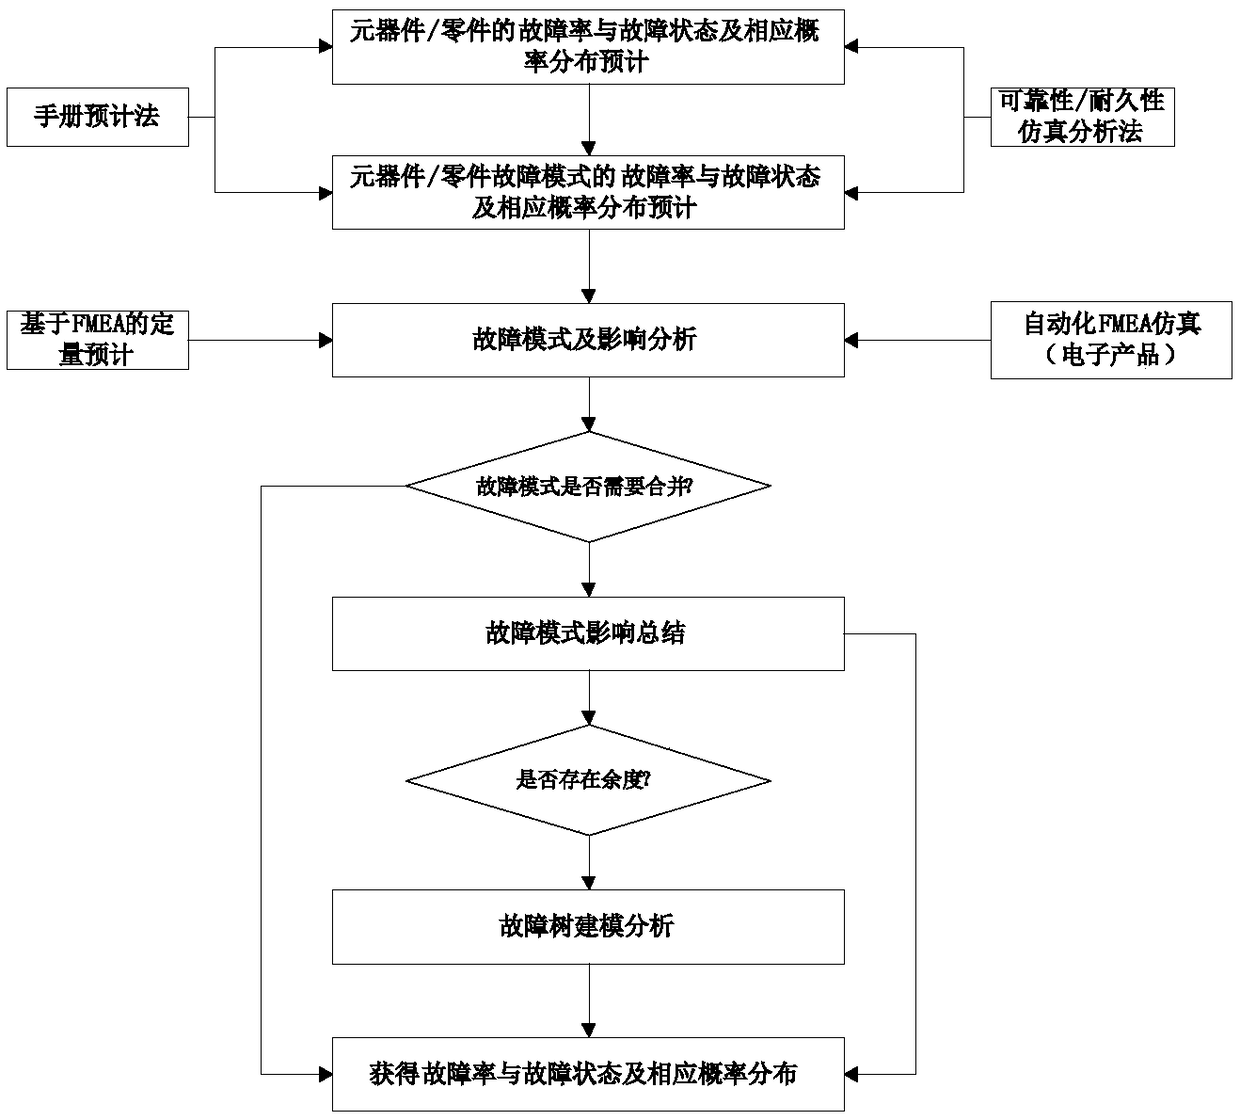 Method for conducting multi-state system task reliability modeling on basis of performance model